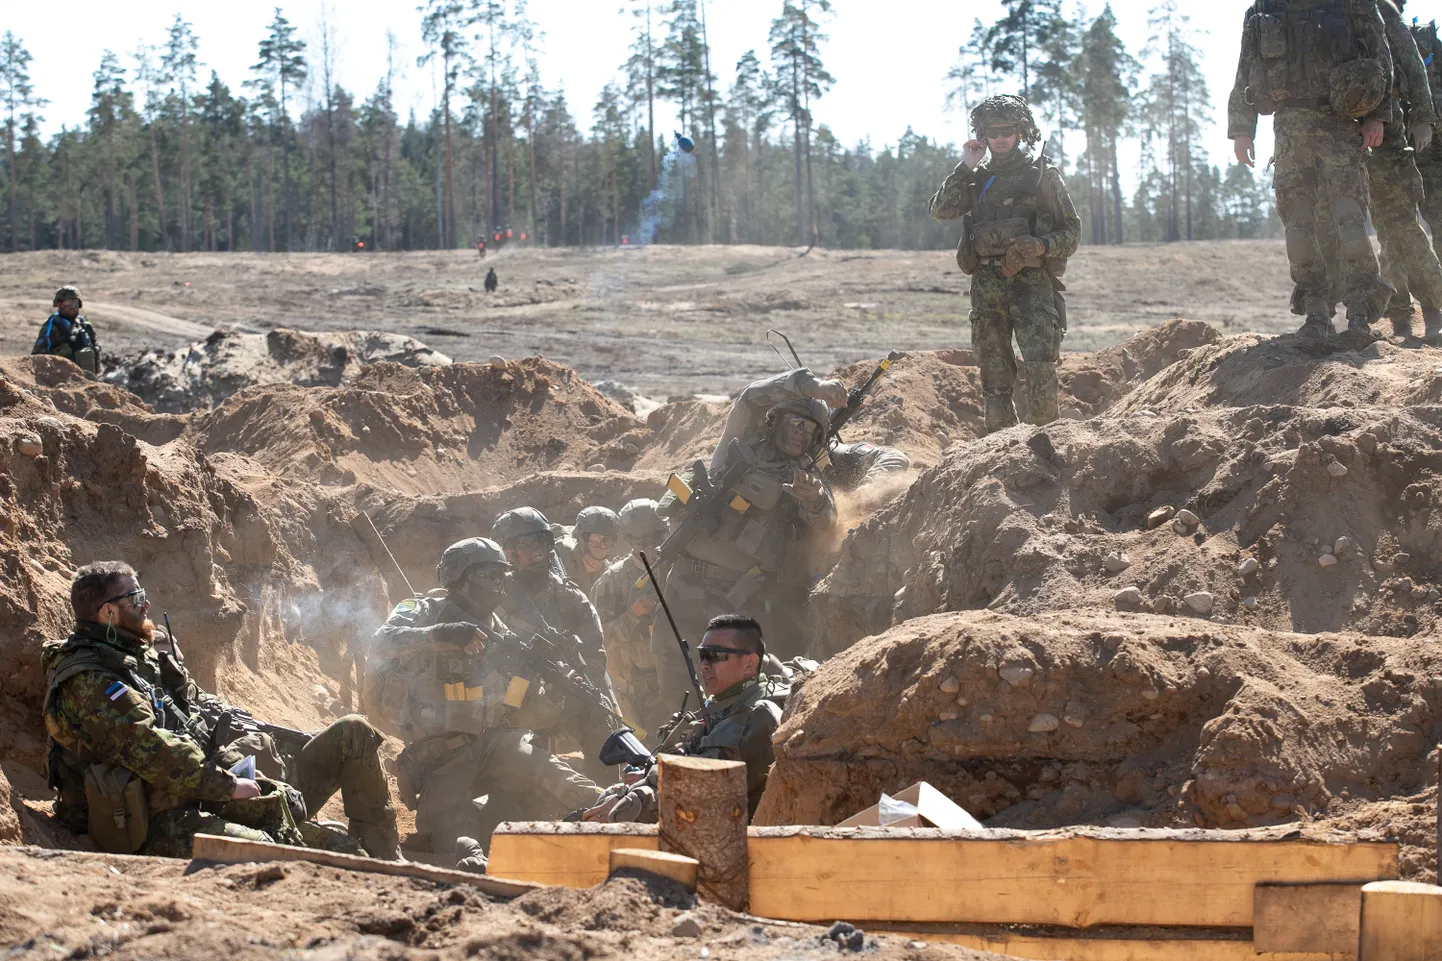 The Estonian Ministry of Defense paid 1.35 million euros in disturbance fees to 16 local governments in connection with military training grounds this year.